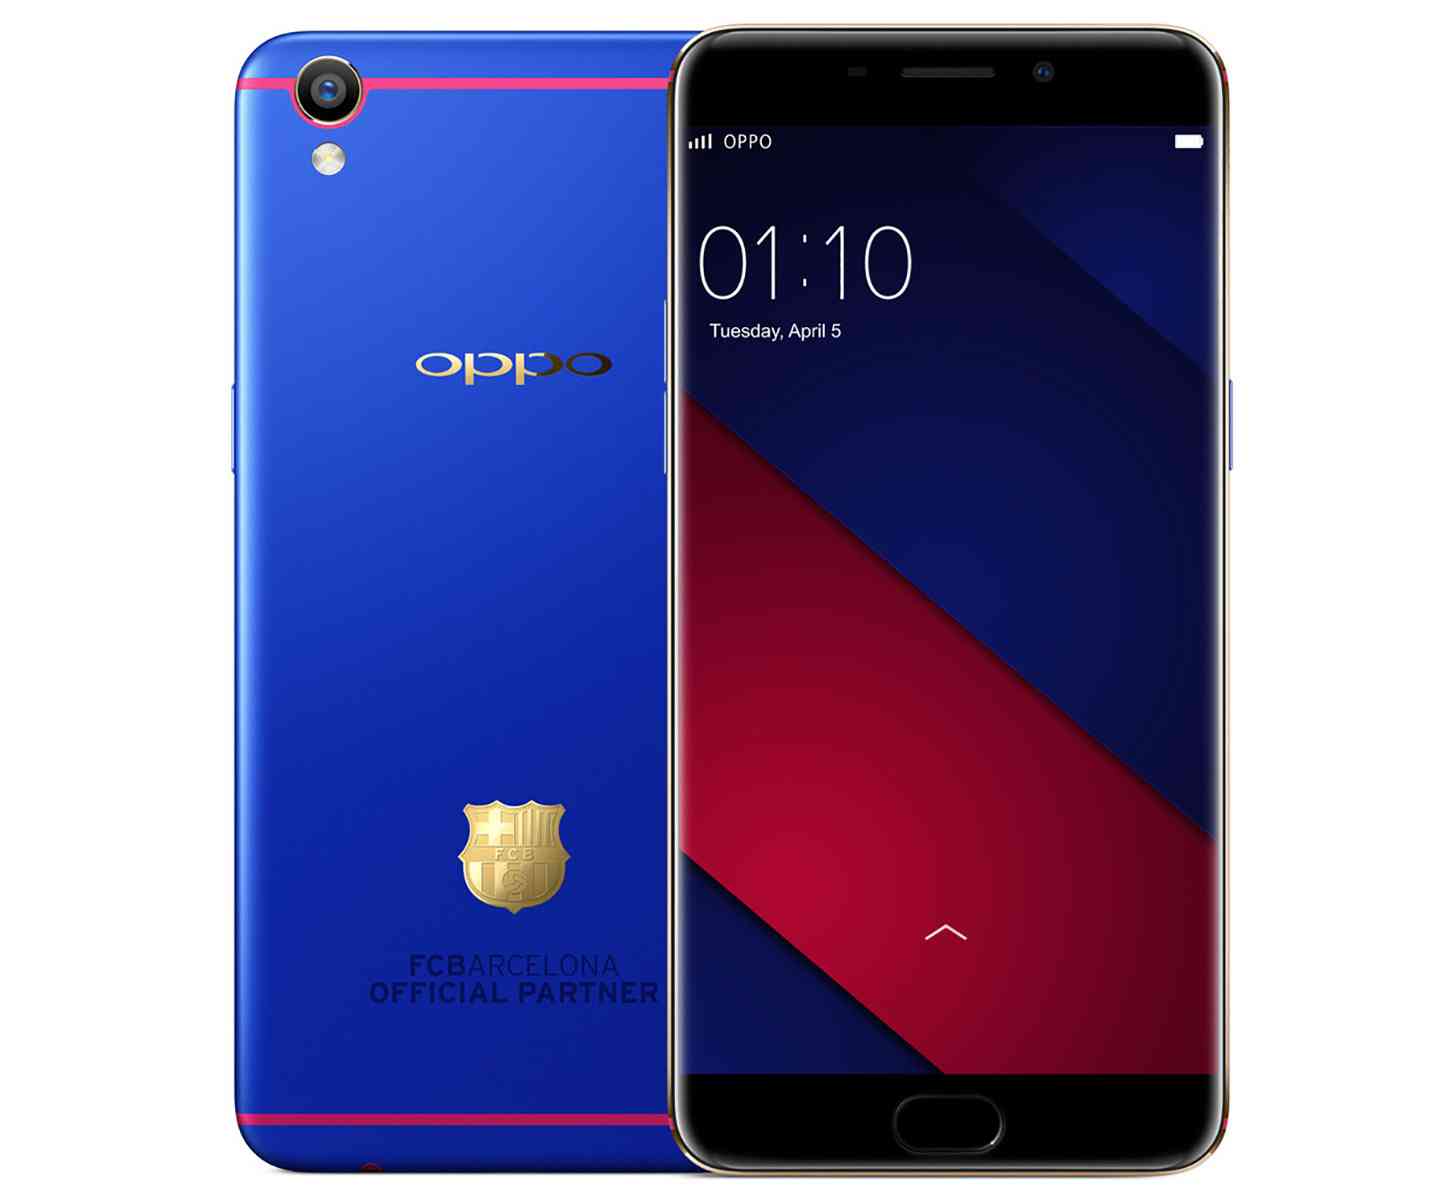 Oppo F1 Plus FC Barcelona Edition official